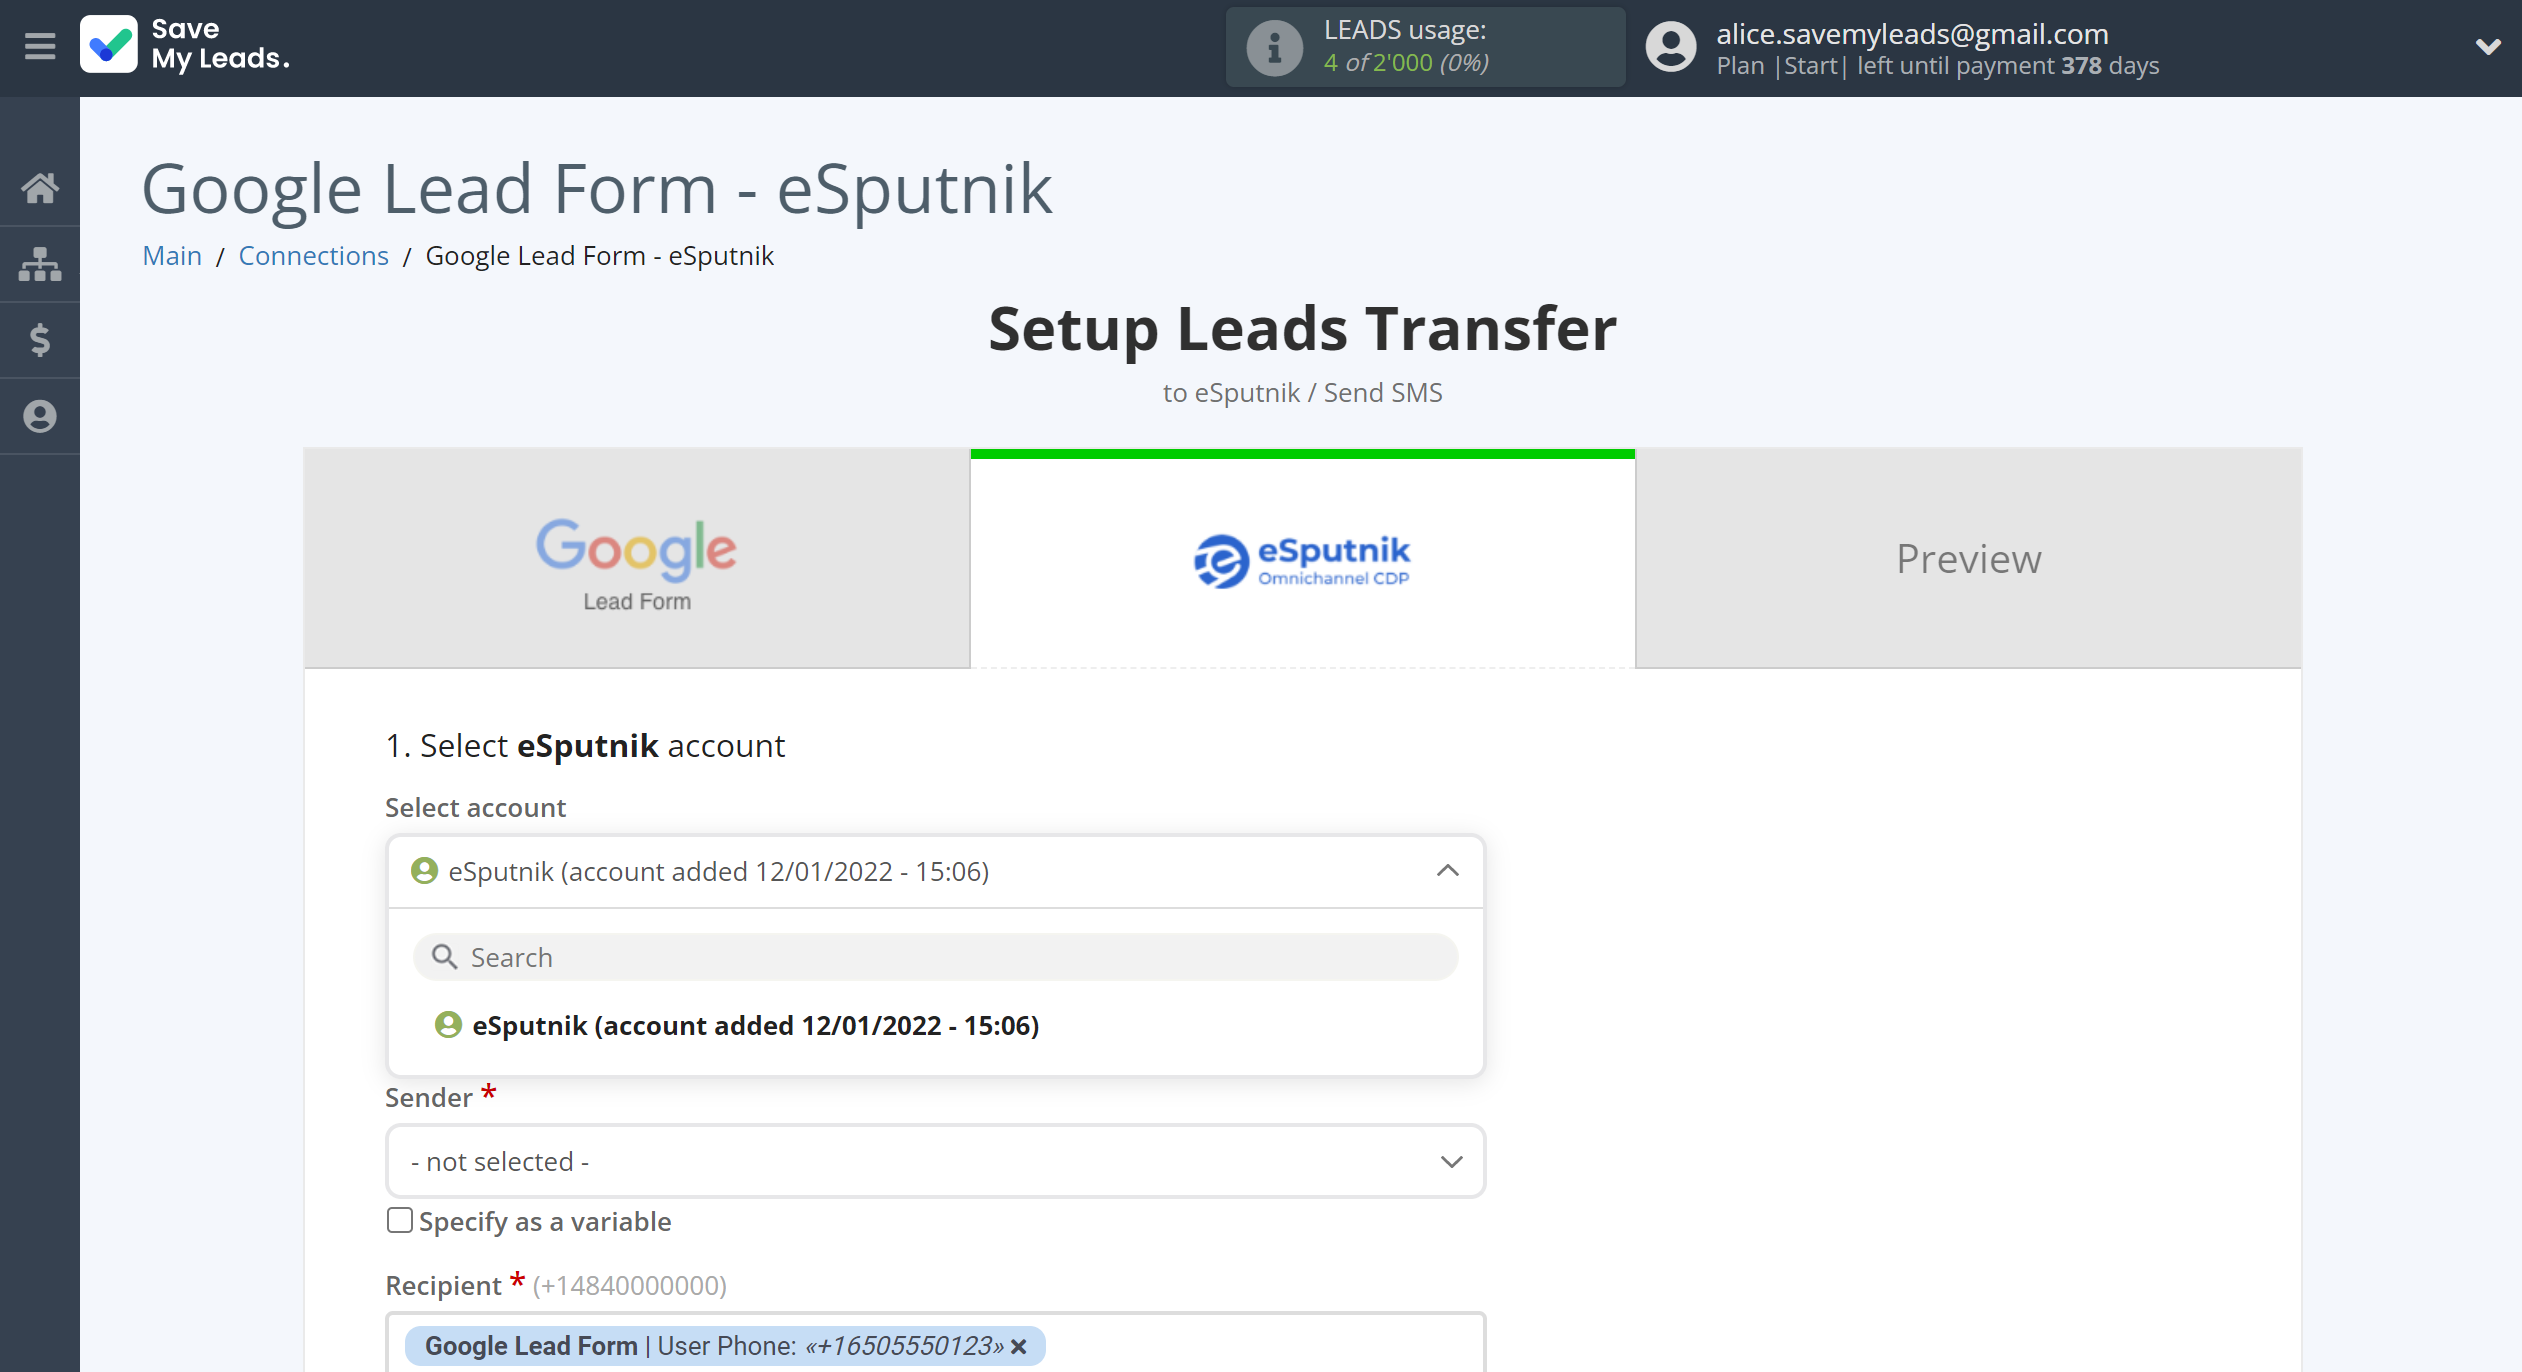 How to Connect Google Lead Form with eSputnik Send SMS | Data Destination account selection